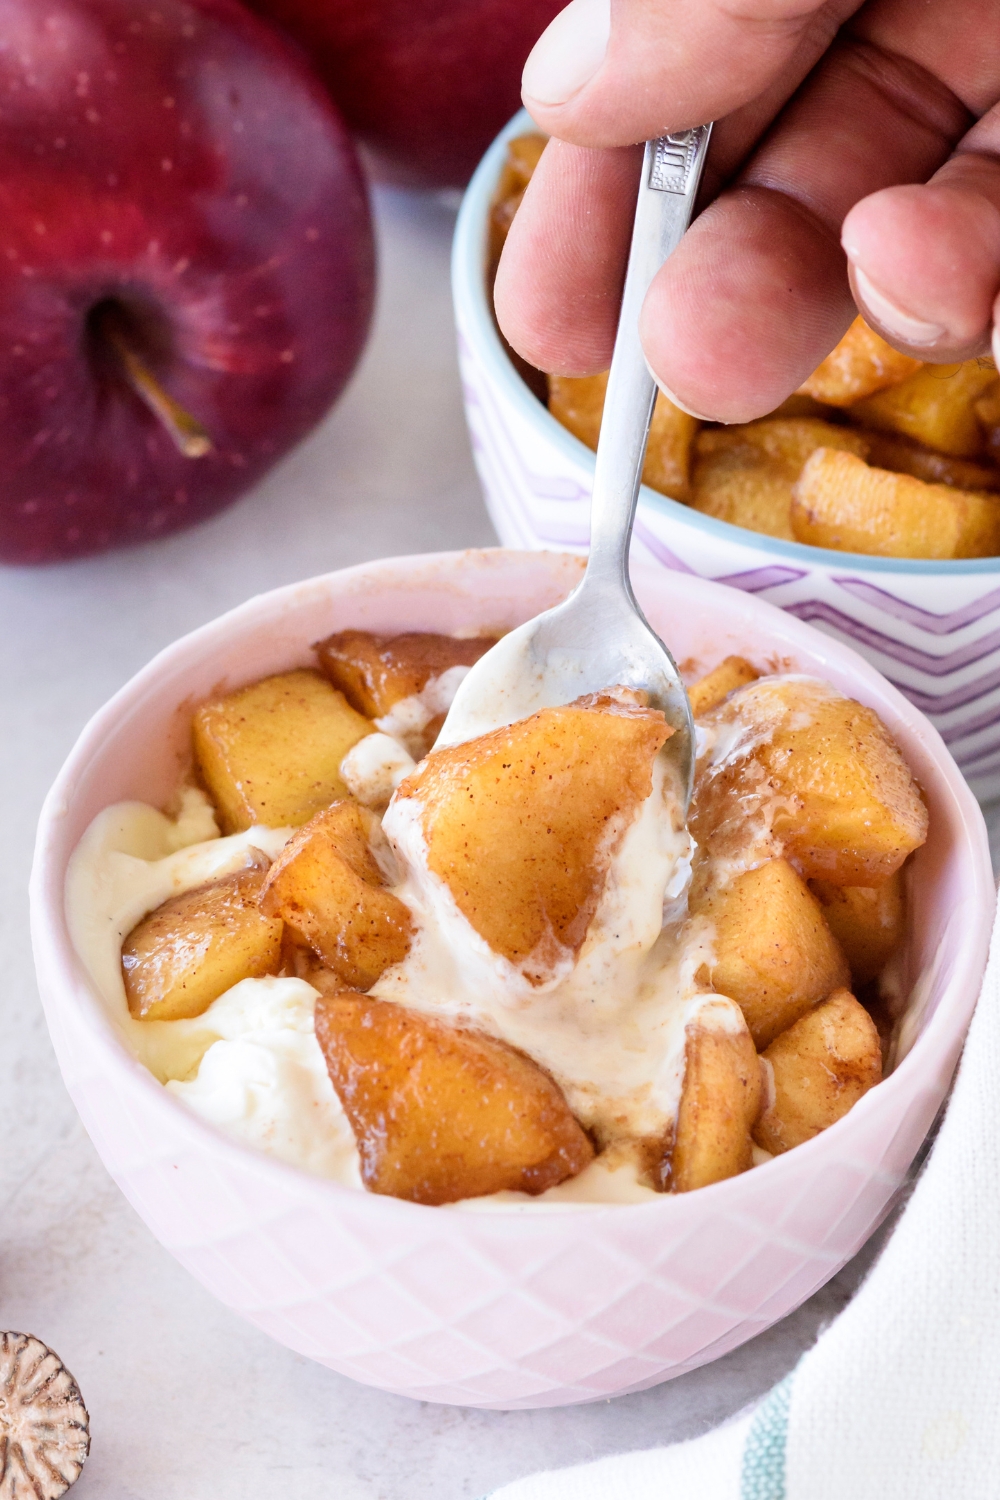 A small bowl of fried apples served on top of vanilla ice cream. A spoon is taking a scoop out of the bowl.